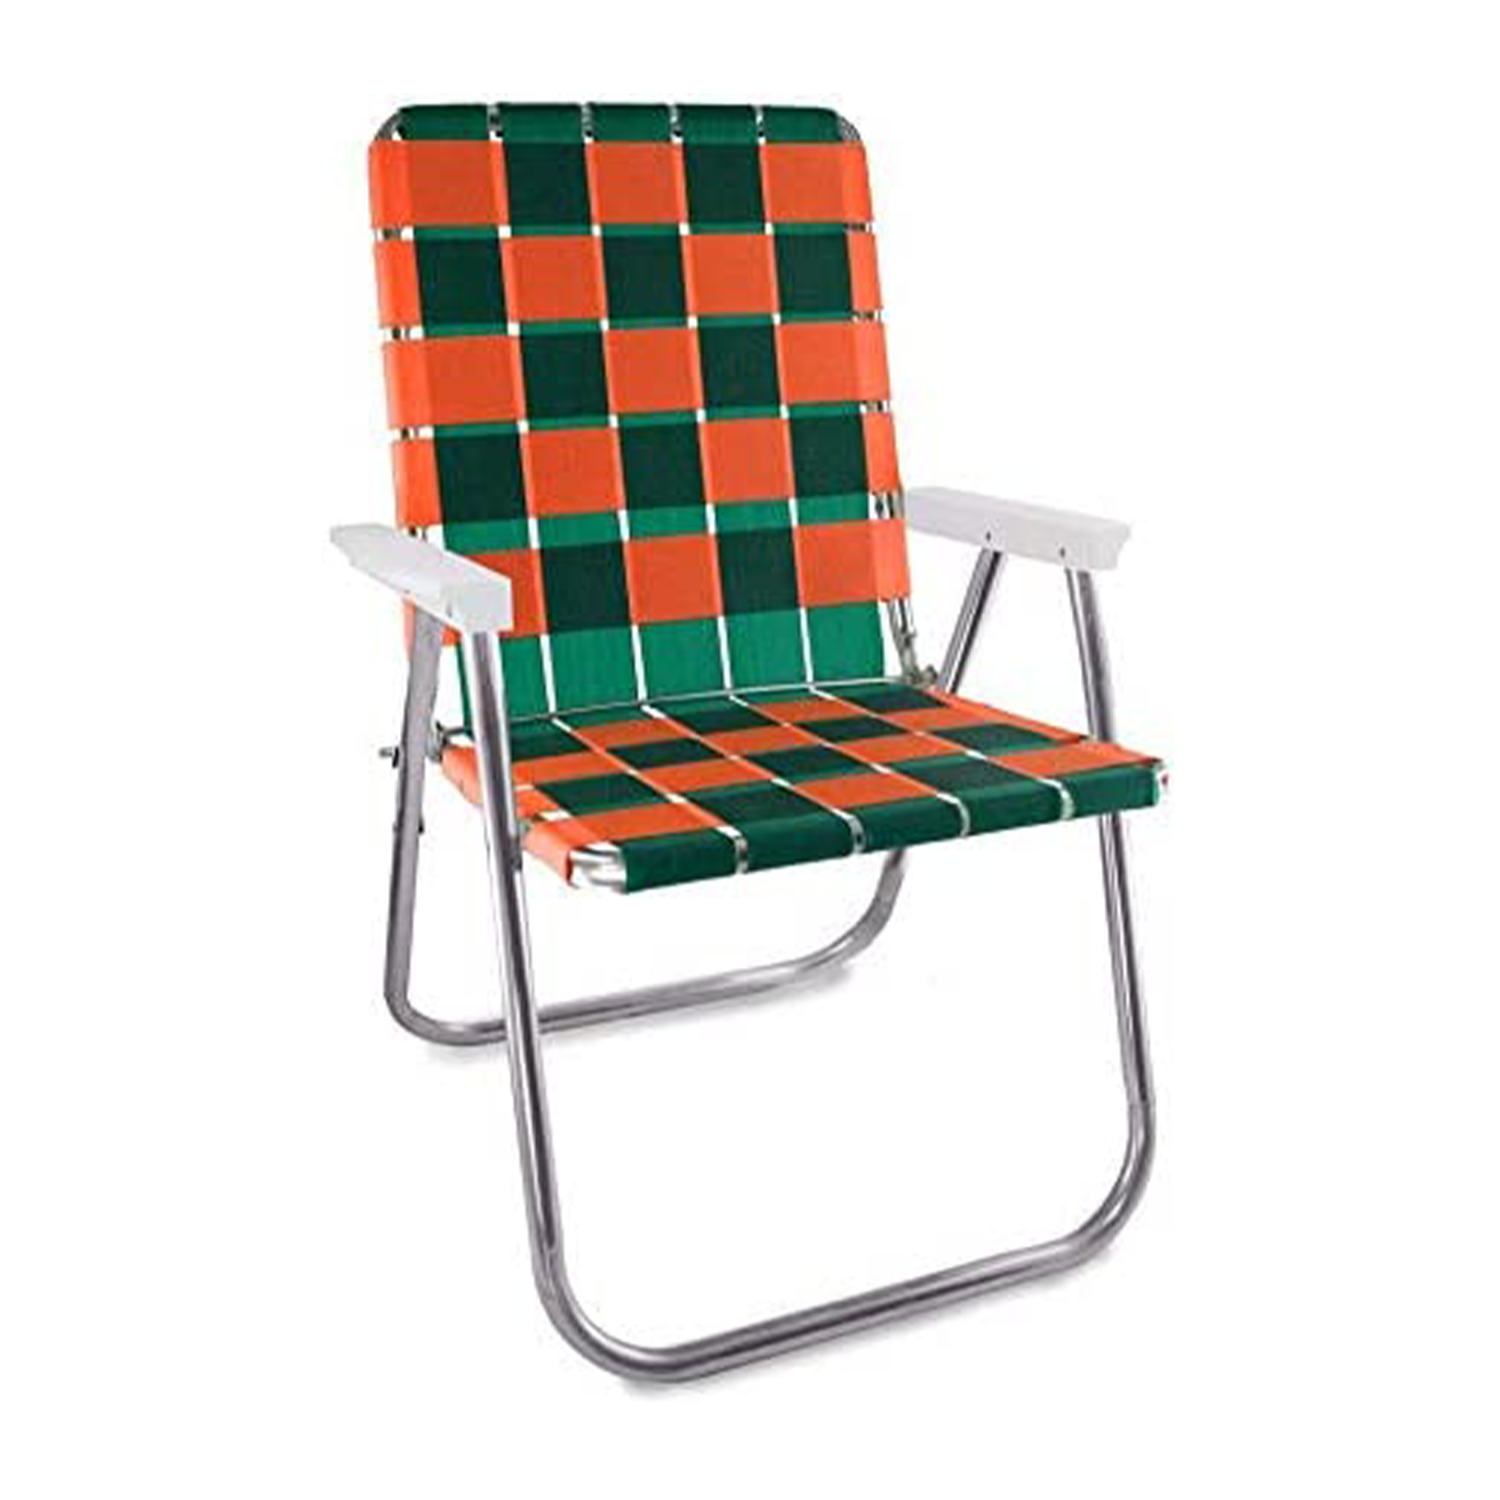 Lawn Chair USA Classic in Green and Orange